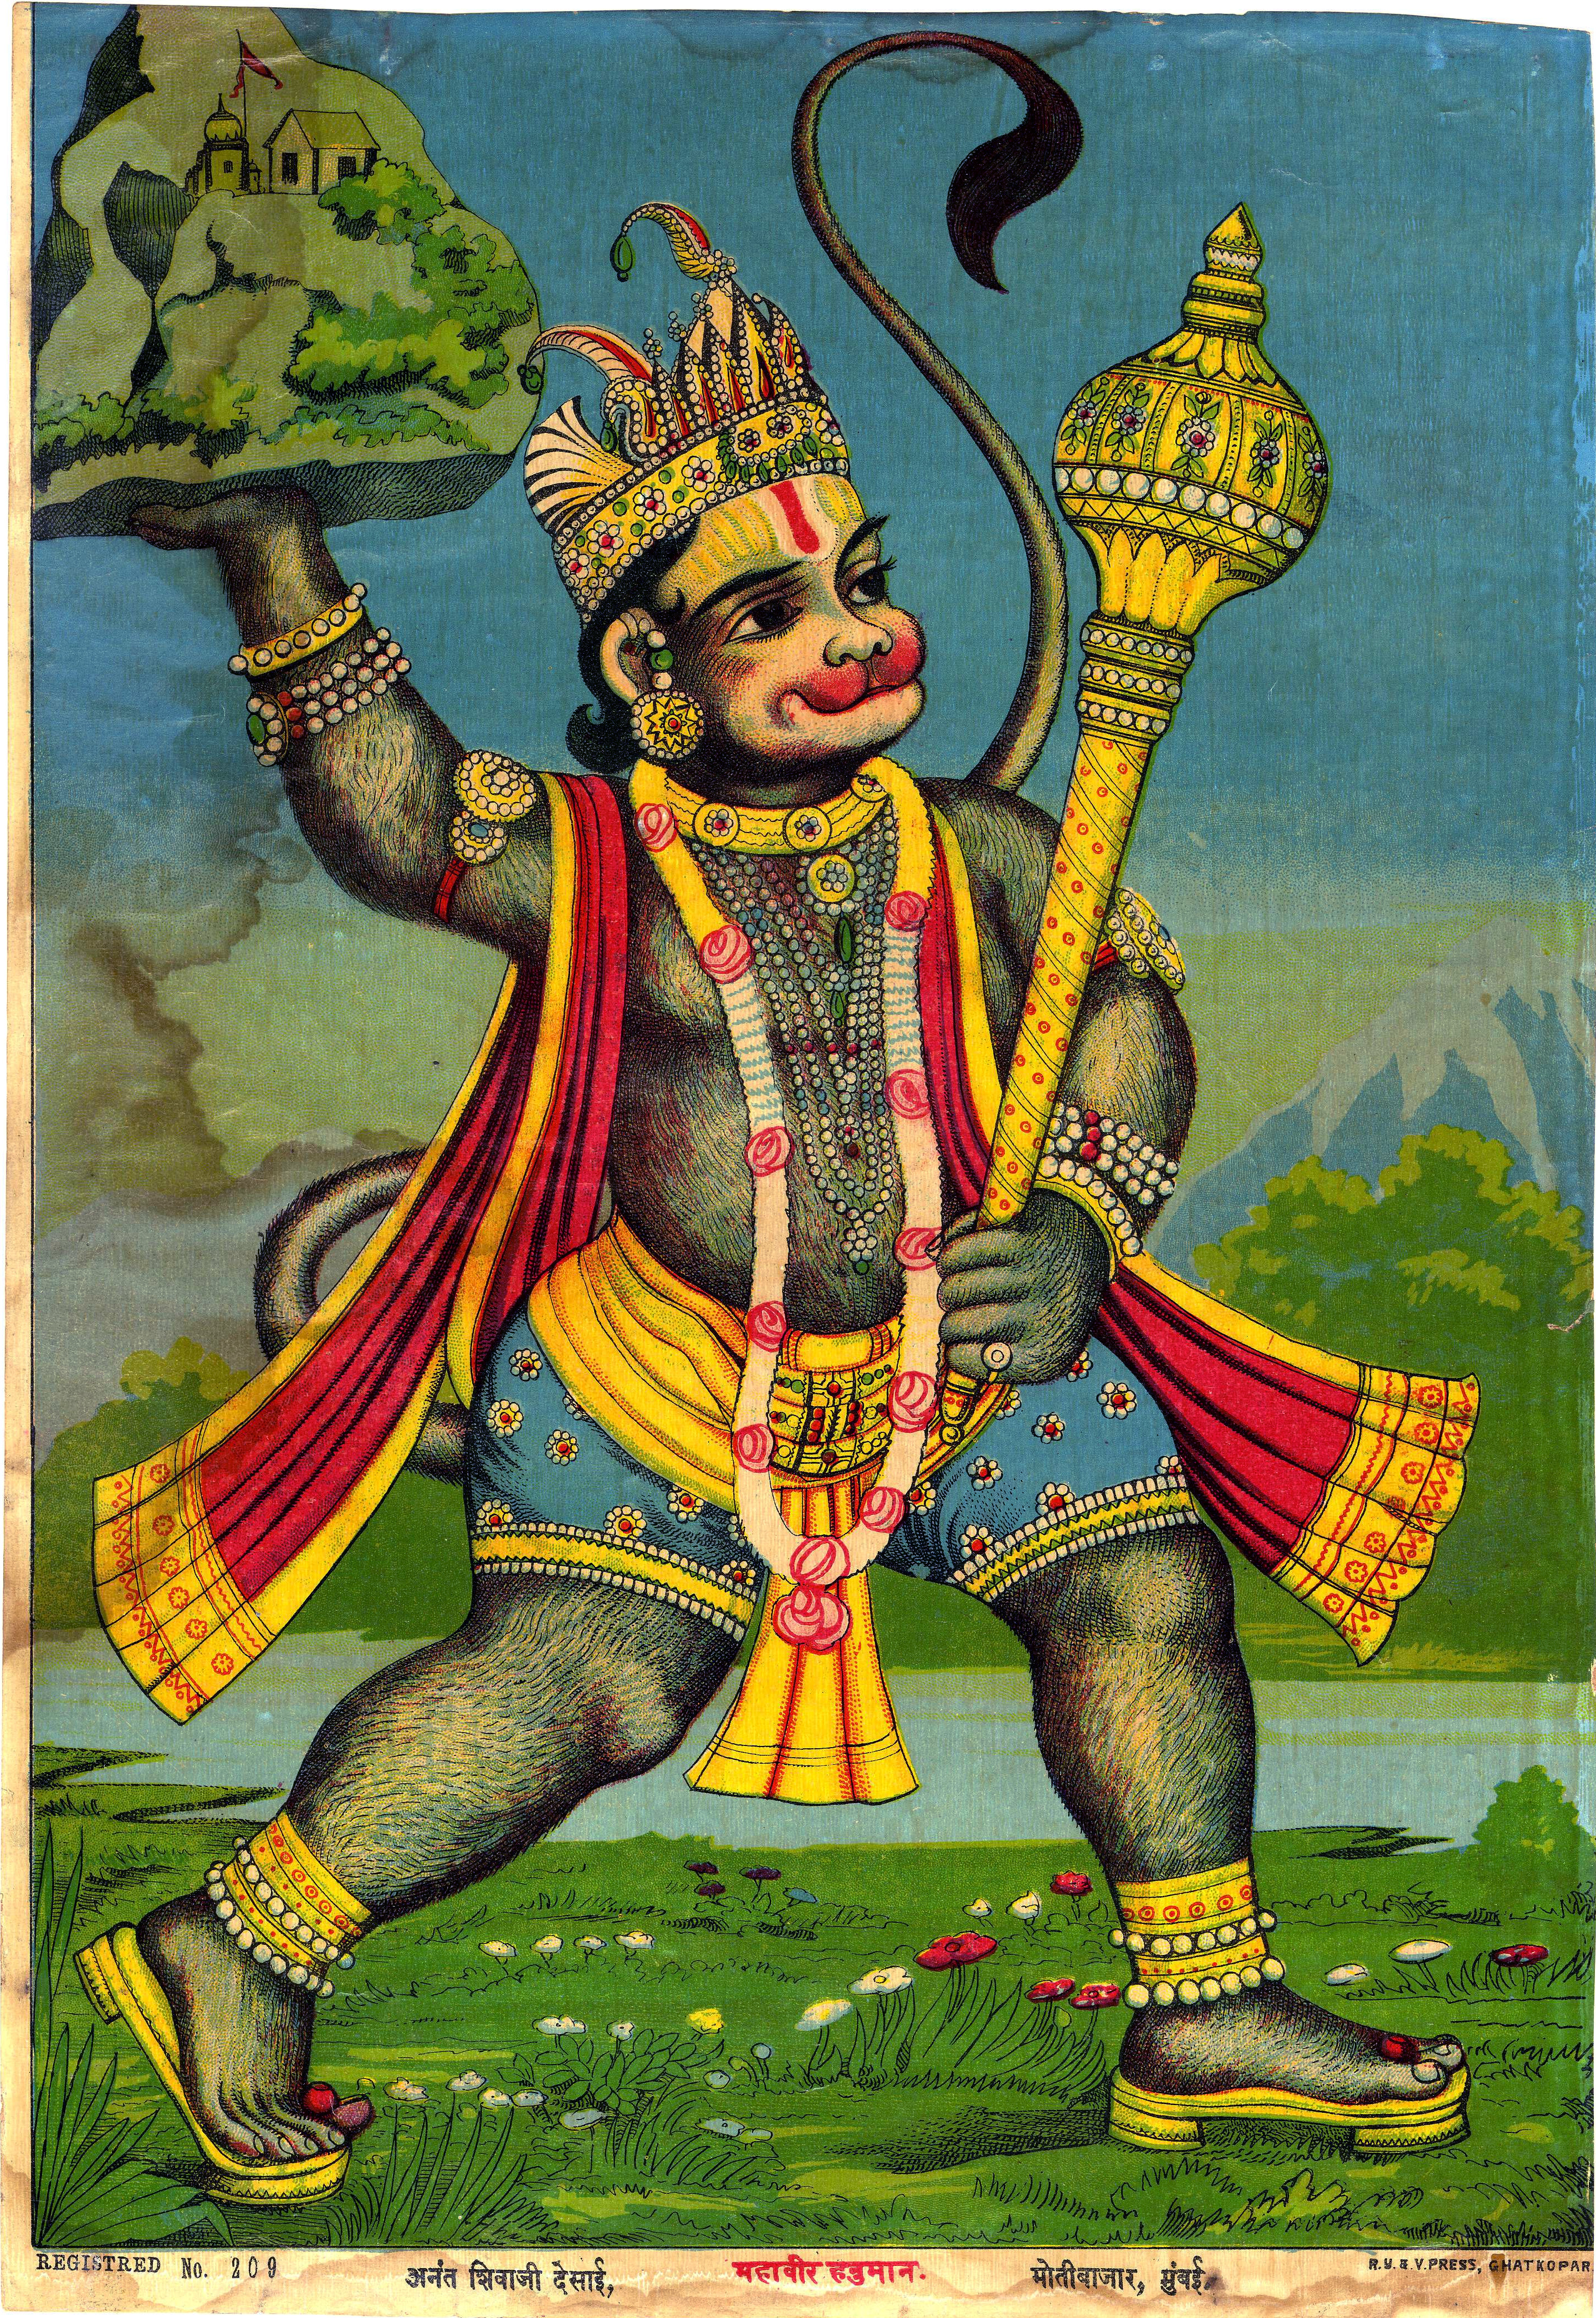 File Hanuman Fetches The Herb Bearing Mountain In A Print From The Ravi Varma Press 1910 S Jpg Wikimedia Commons